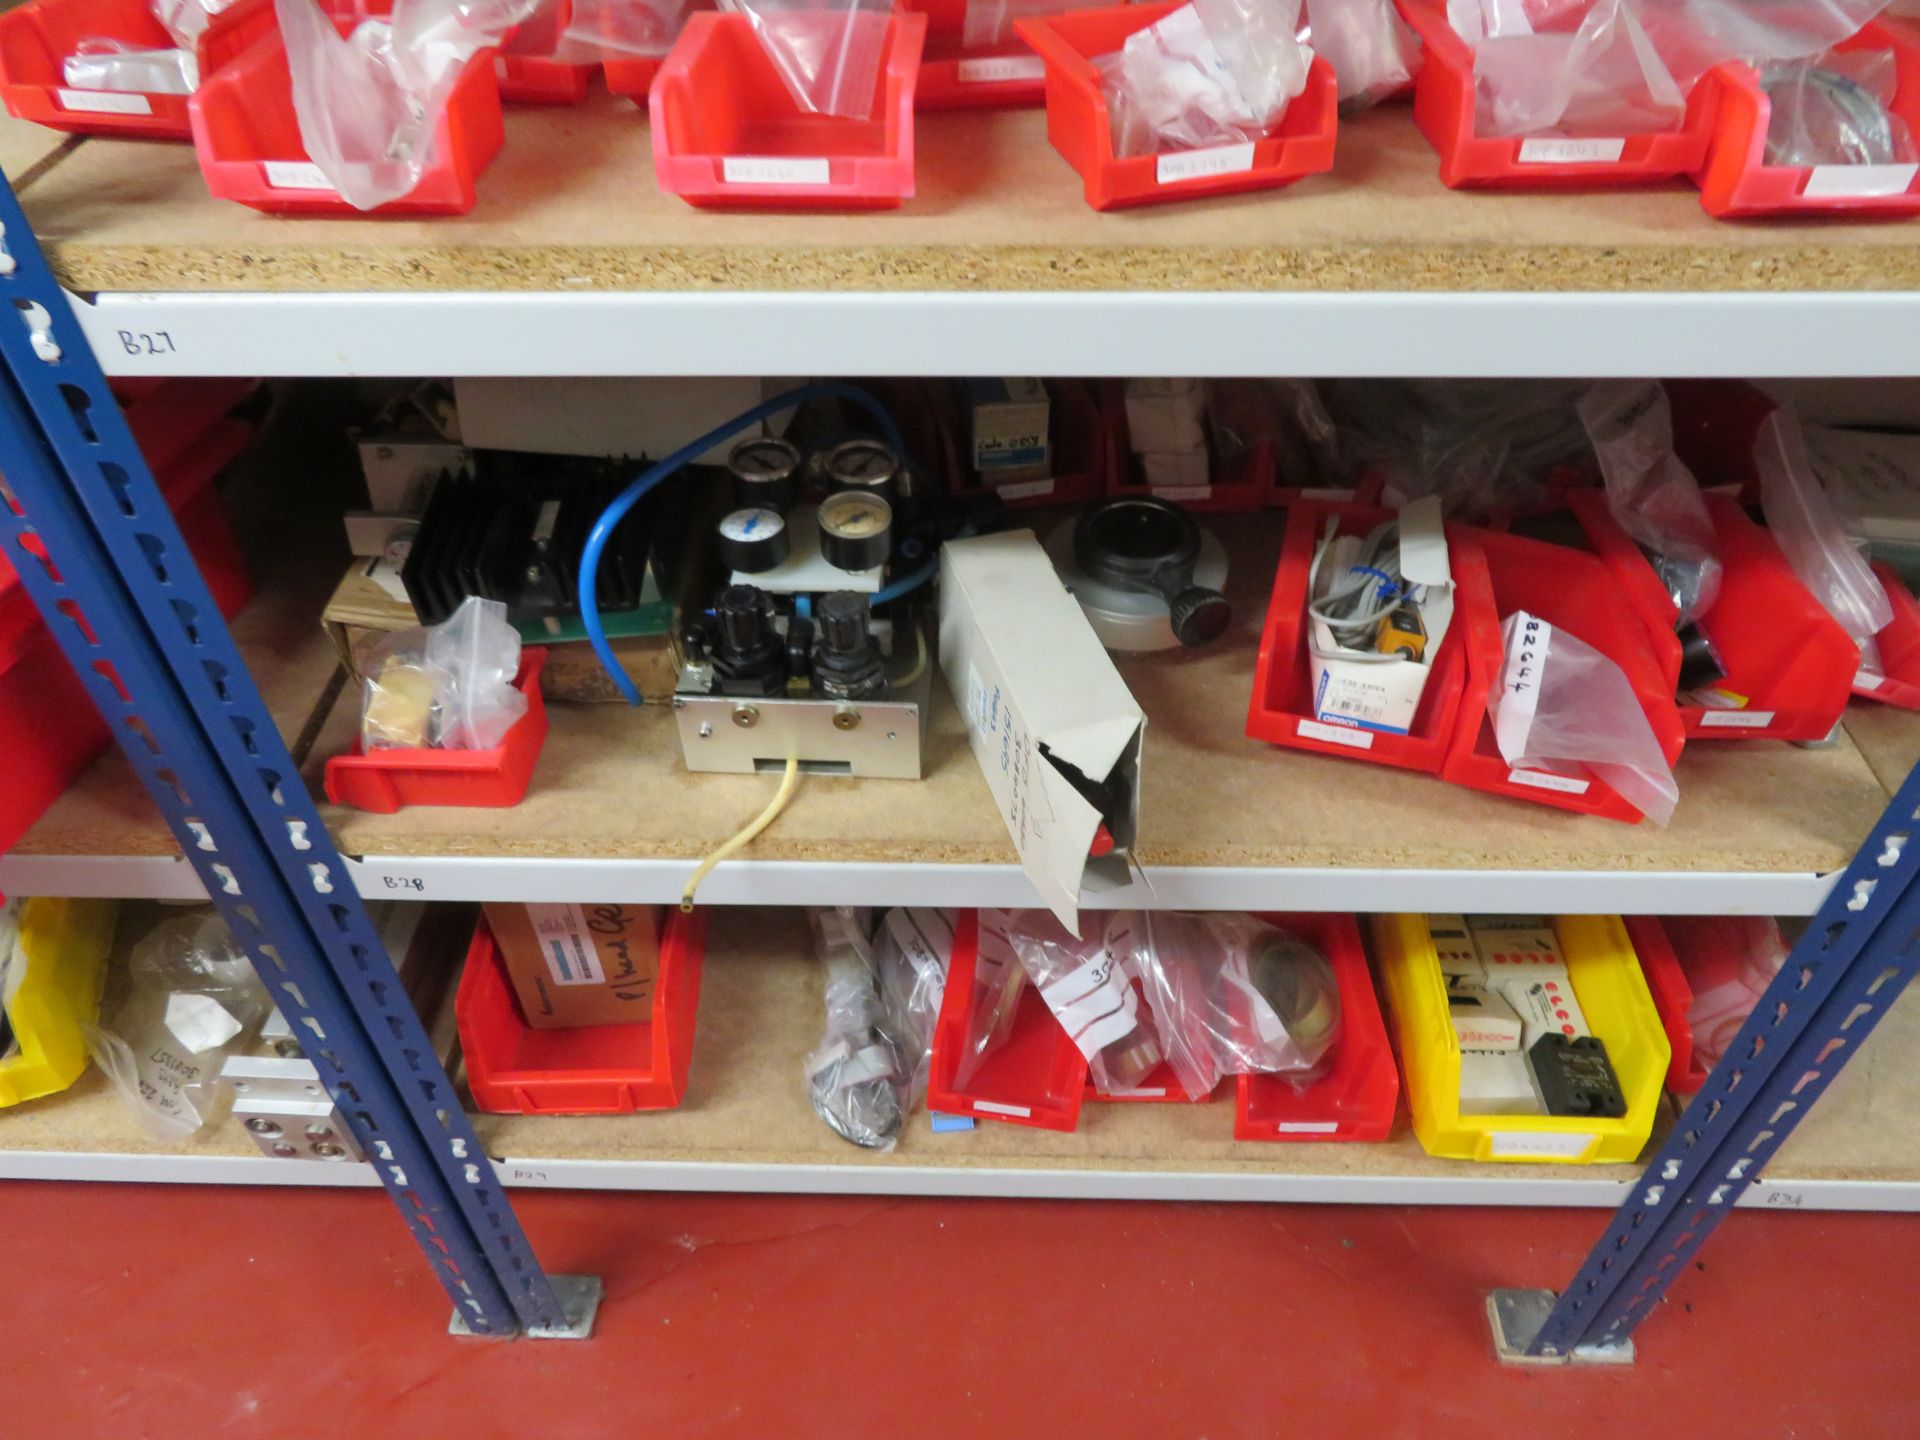 Contents of engineering stores - Image 8 of 22